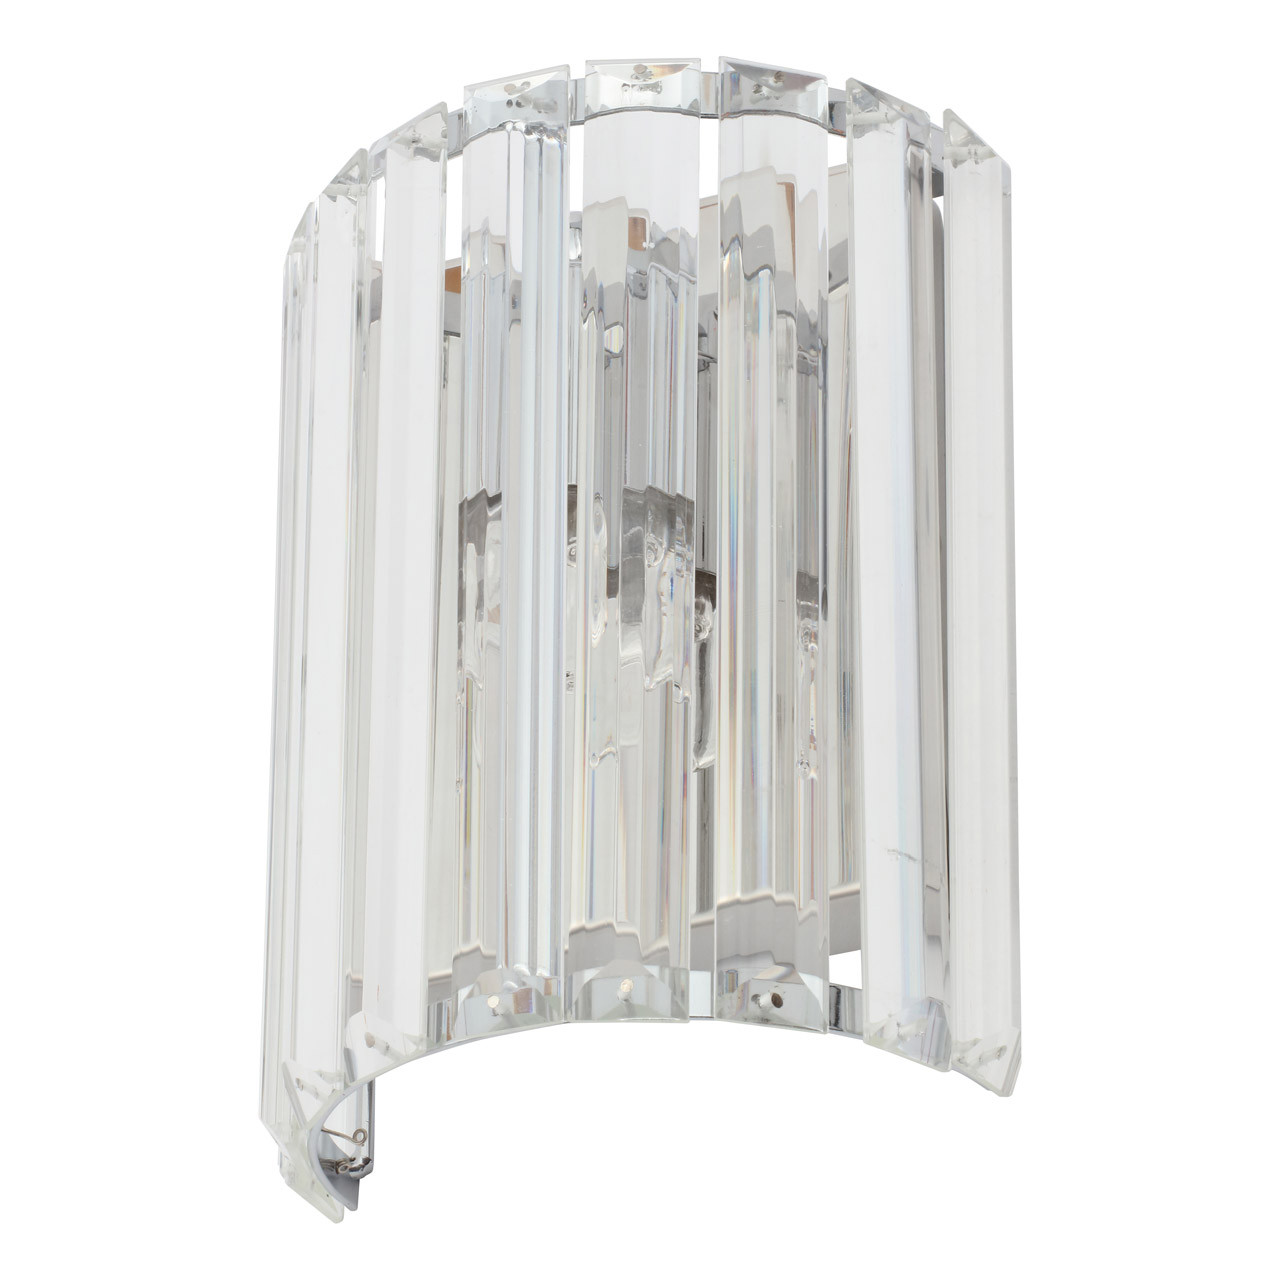 Photos - Chandelier / Lamp SPA Pegasi Shield Wall Light Crystal Glass and Chrome -33931-CHR 